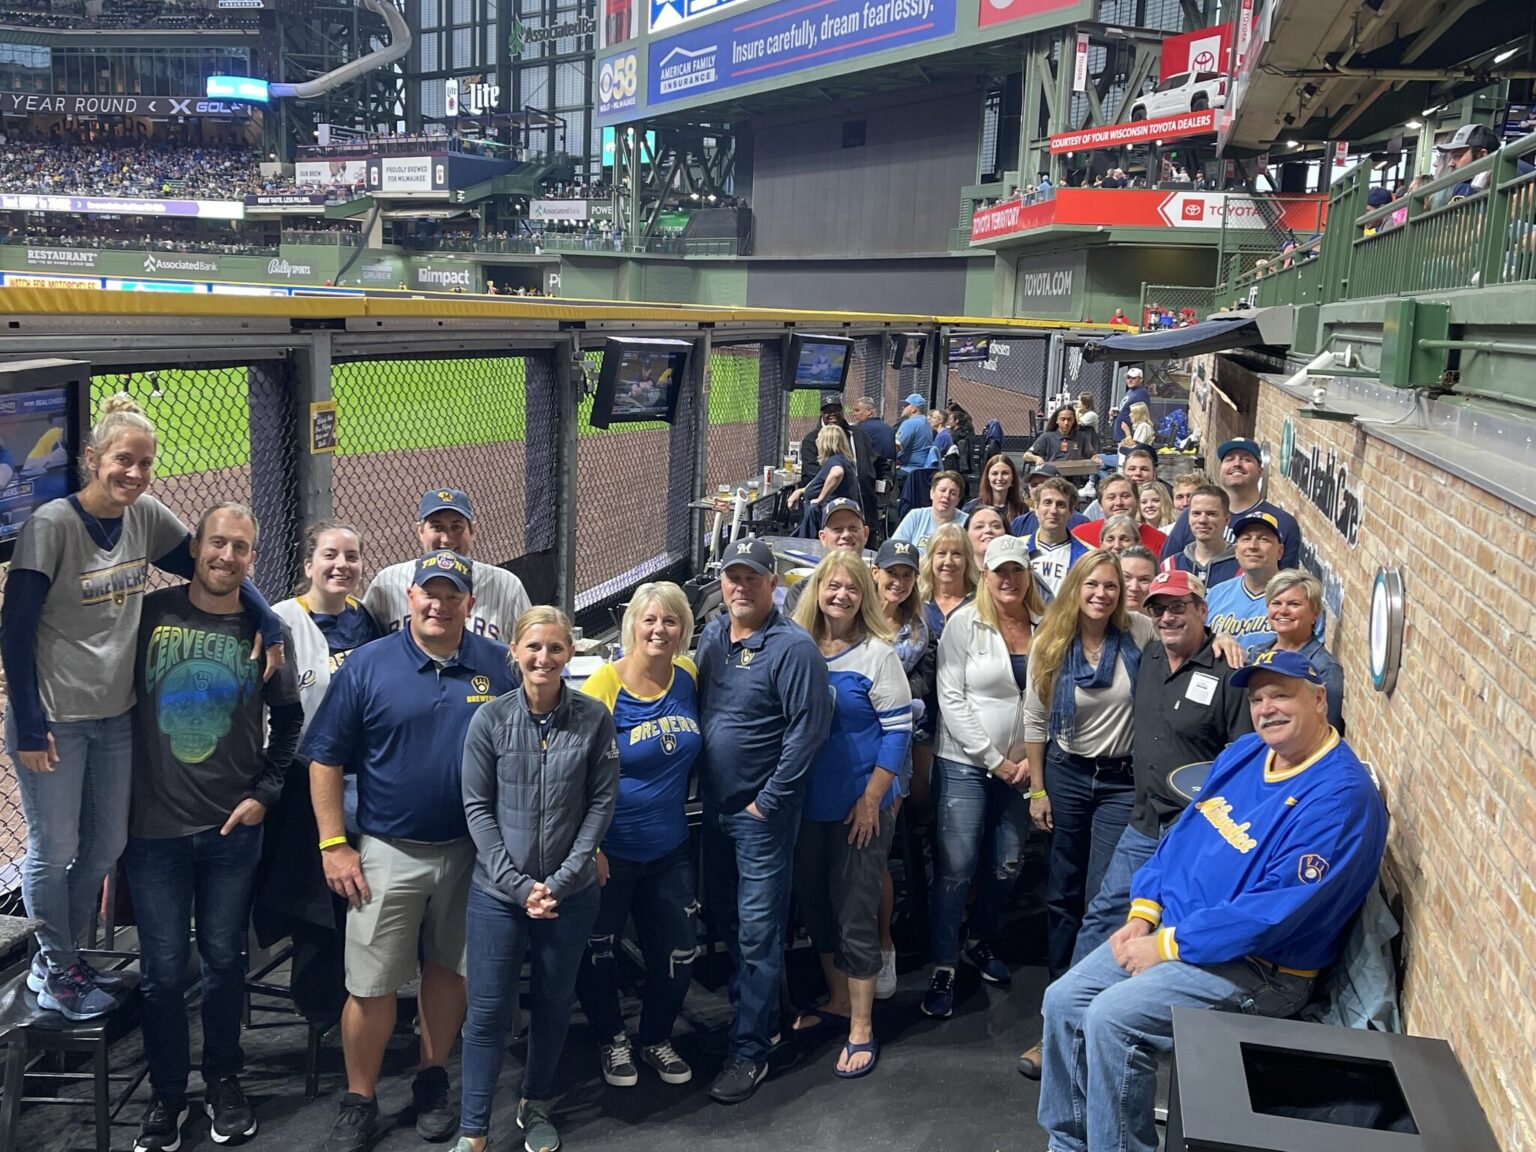 Capitol Bank employees attending a Brewers game